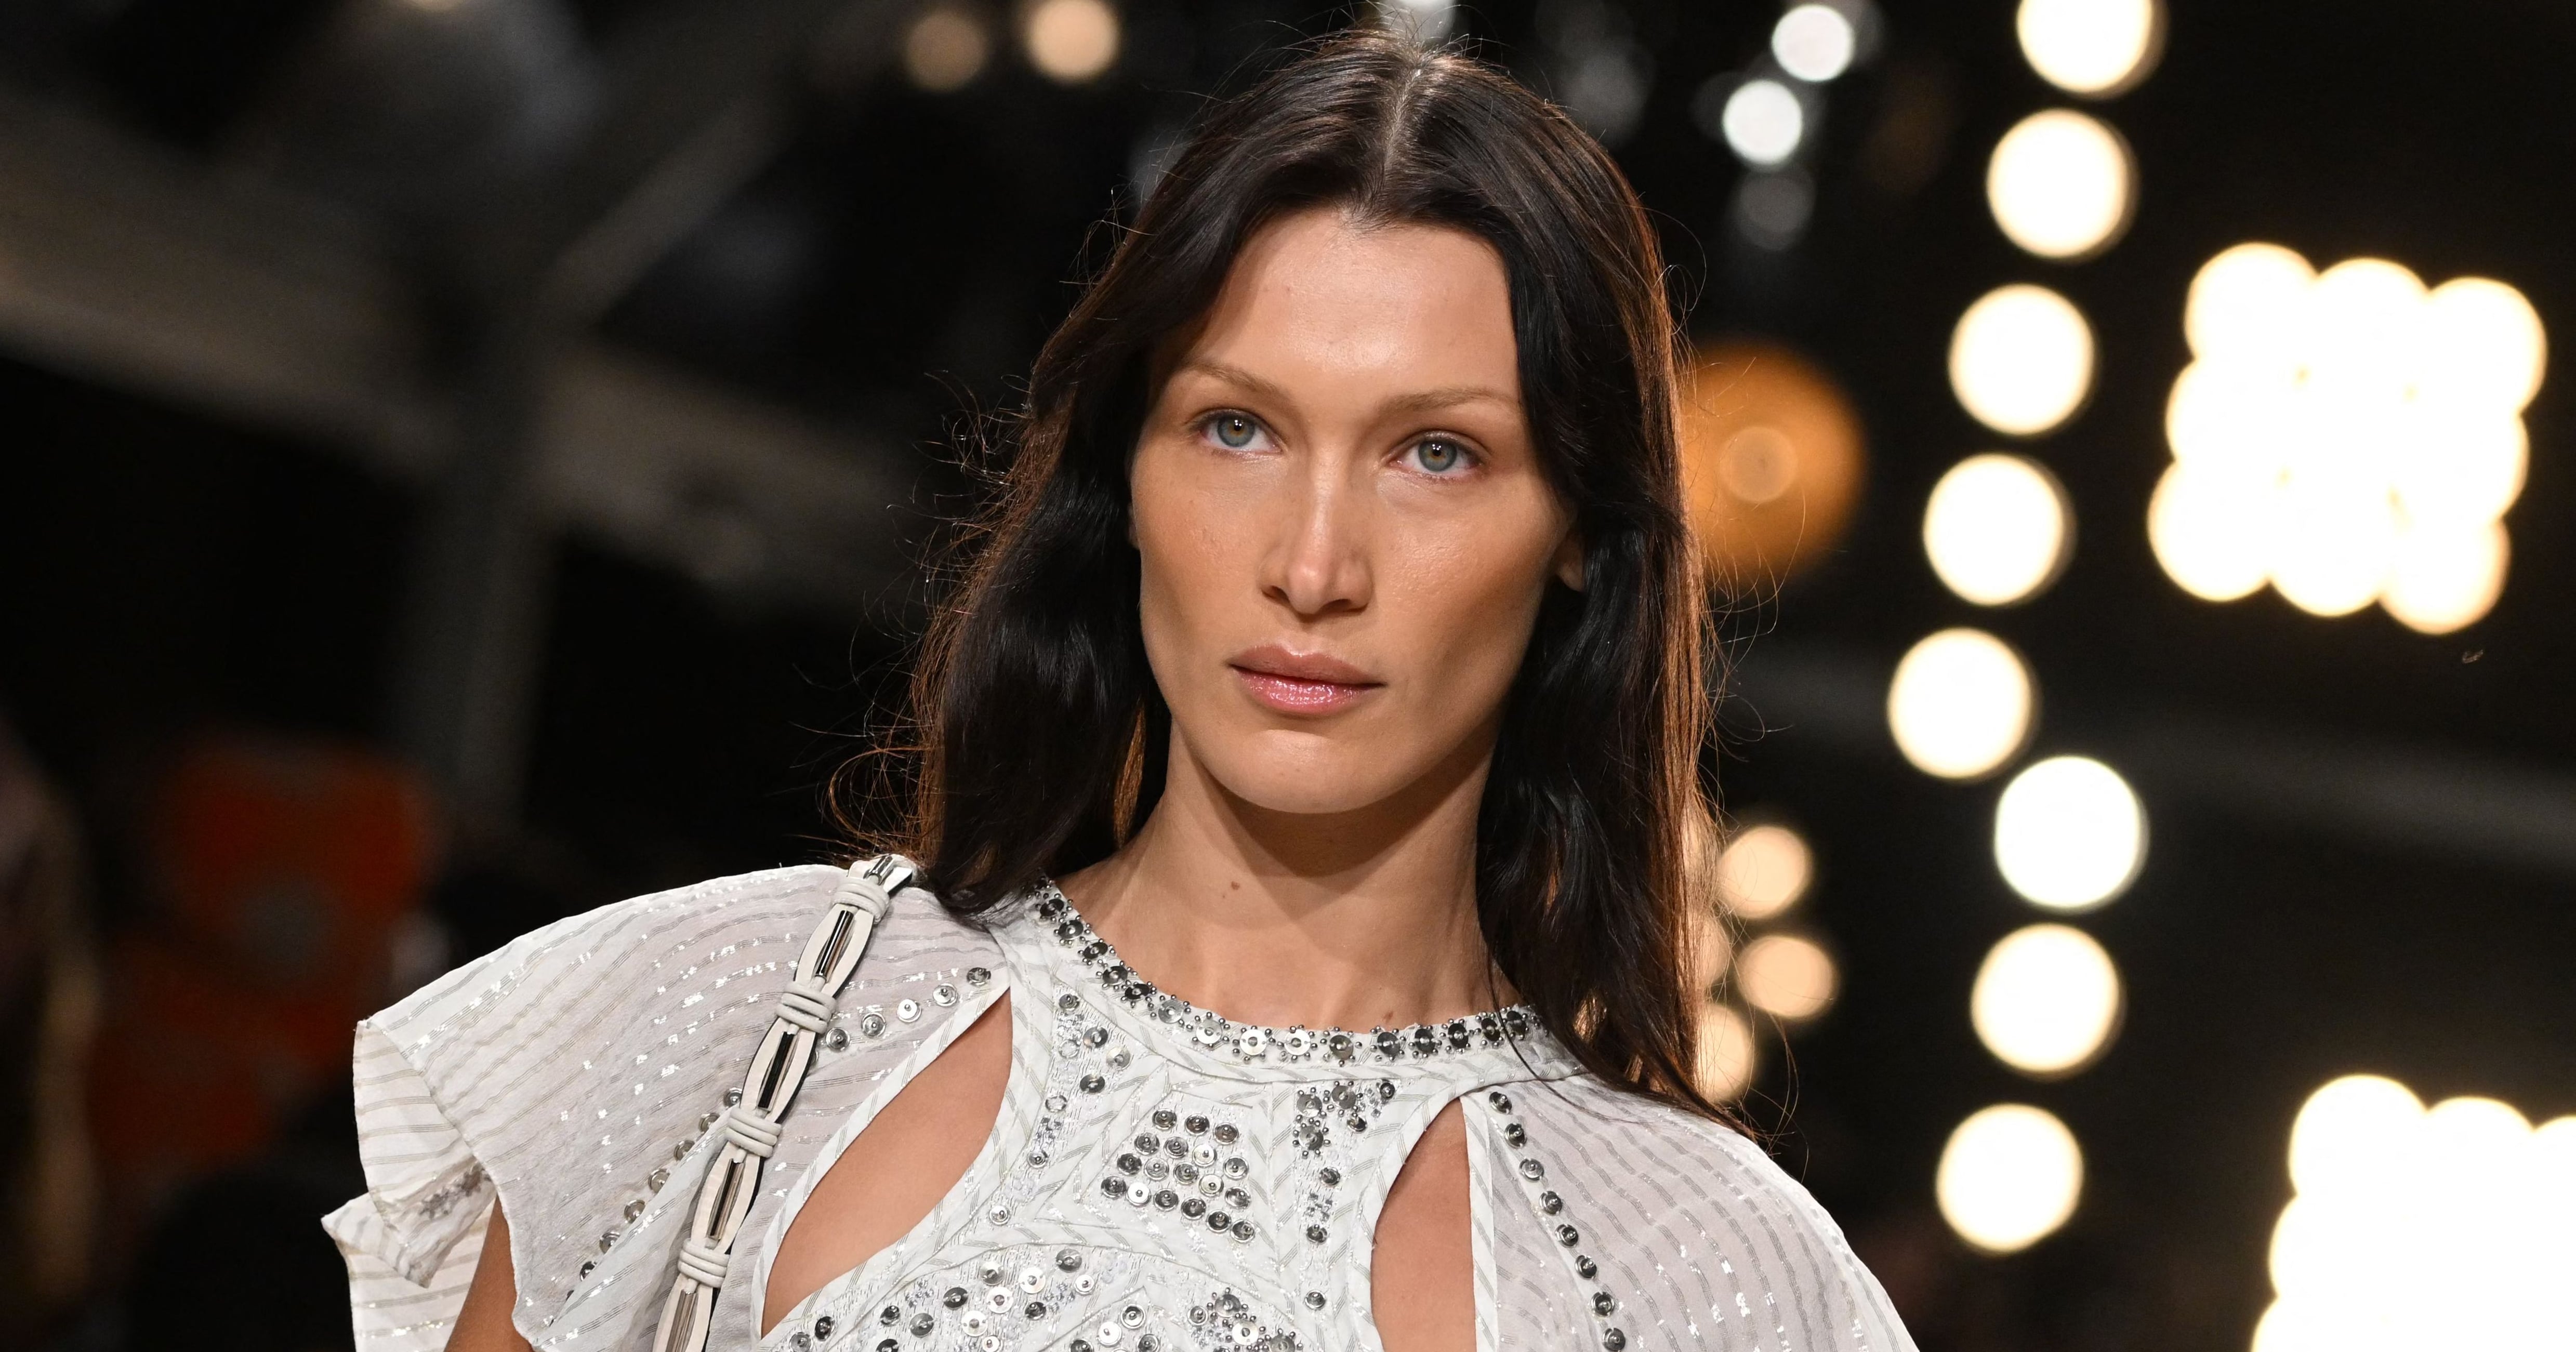 Bella Hadid Says She’s “Finally Healthy” After Undergoing Treatment For Lyme Disease